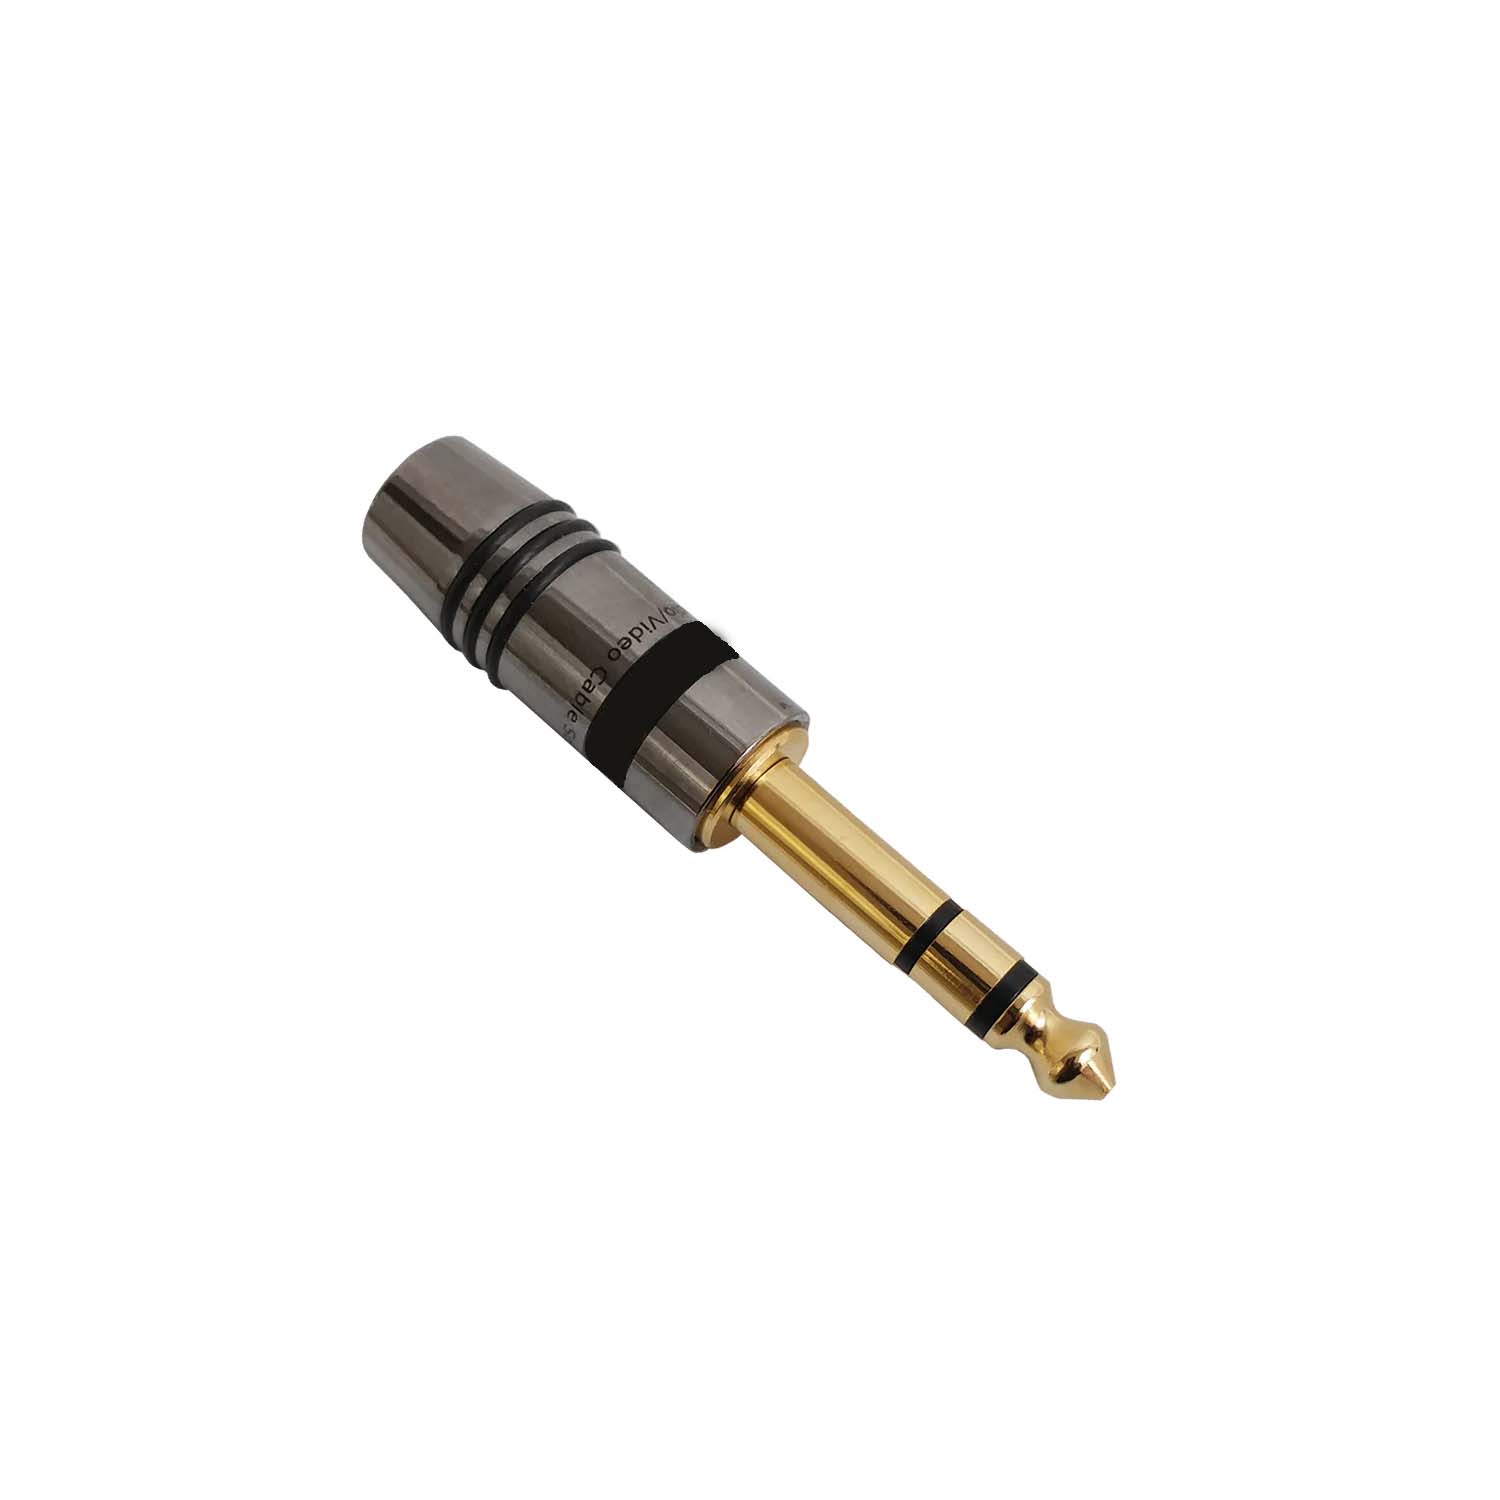 TRS 14 inch Stereo Male Solder Connector 9.5mm ID Black